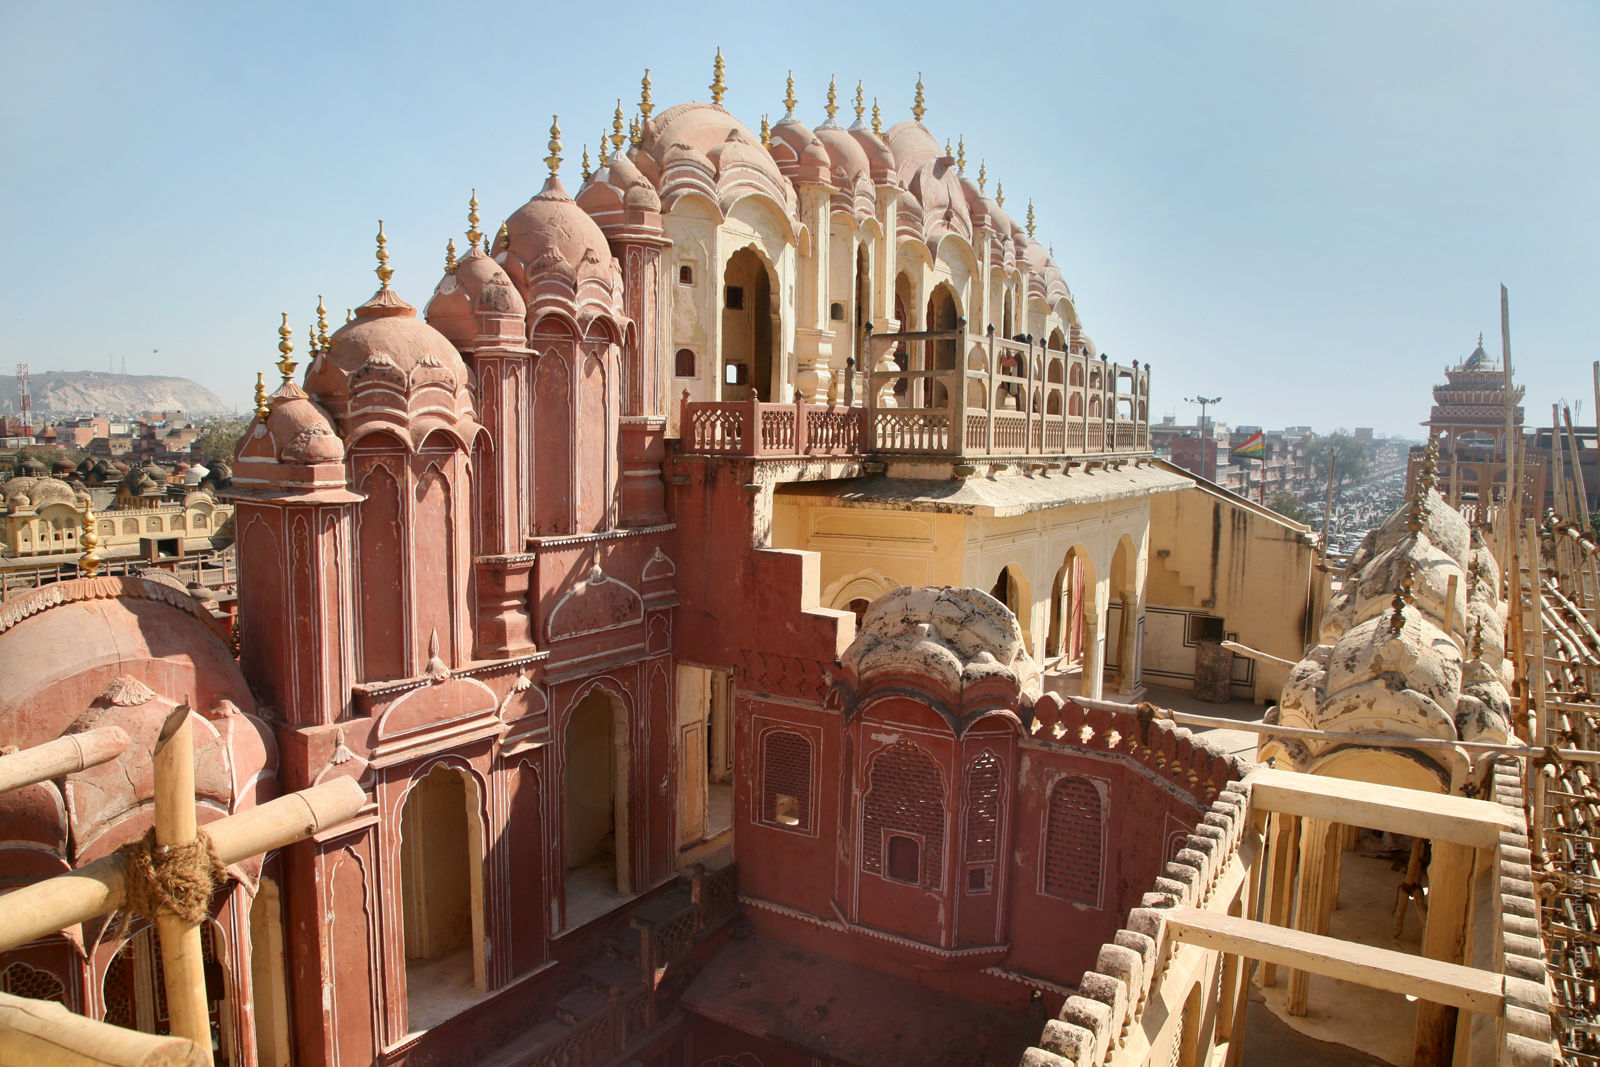 Palace of the Winds Hawa Mahal, Jaipur, tour of the Golden Triangle of India, September 2023.